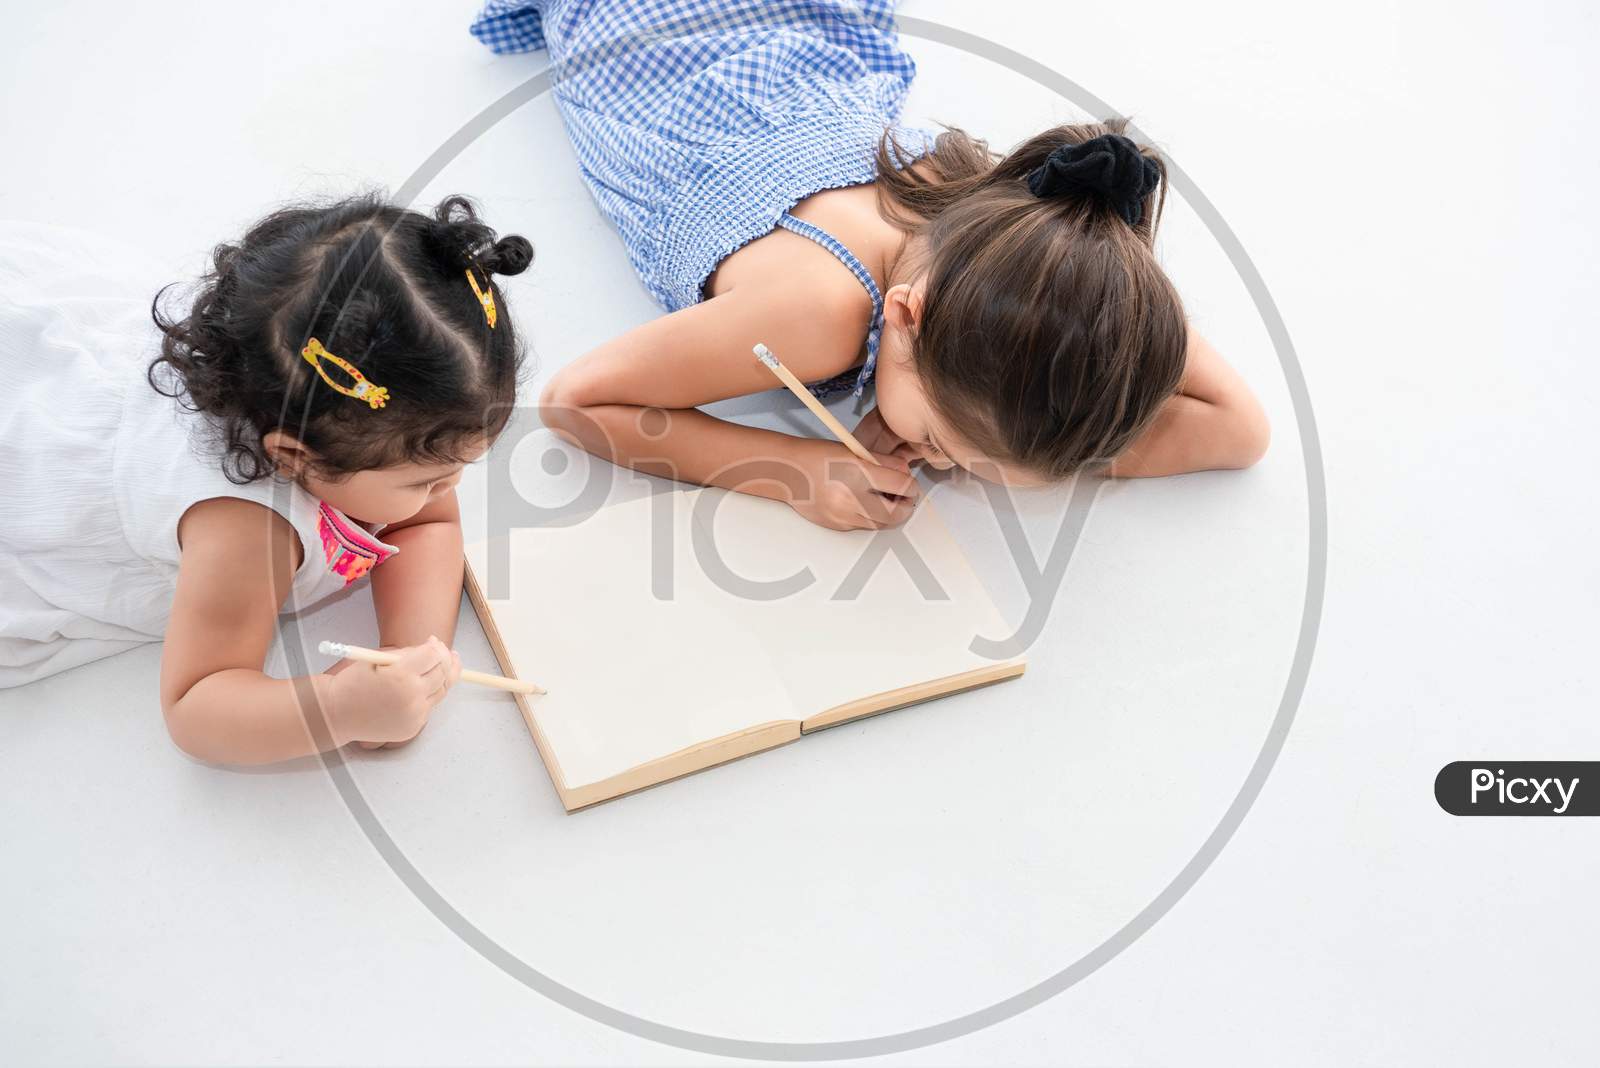 Top View Of Happy Two Sister Drawing In Sketch Book Together At Home Or Nursery. People Lifestyle And Kids Play. Education And Children Concept. Diverse Ethnicity And Ages. Back To School Theme